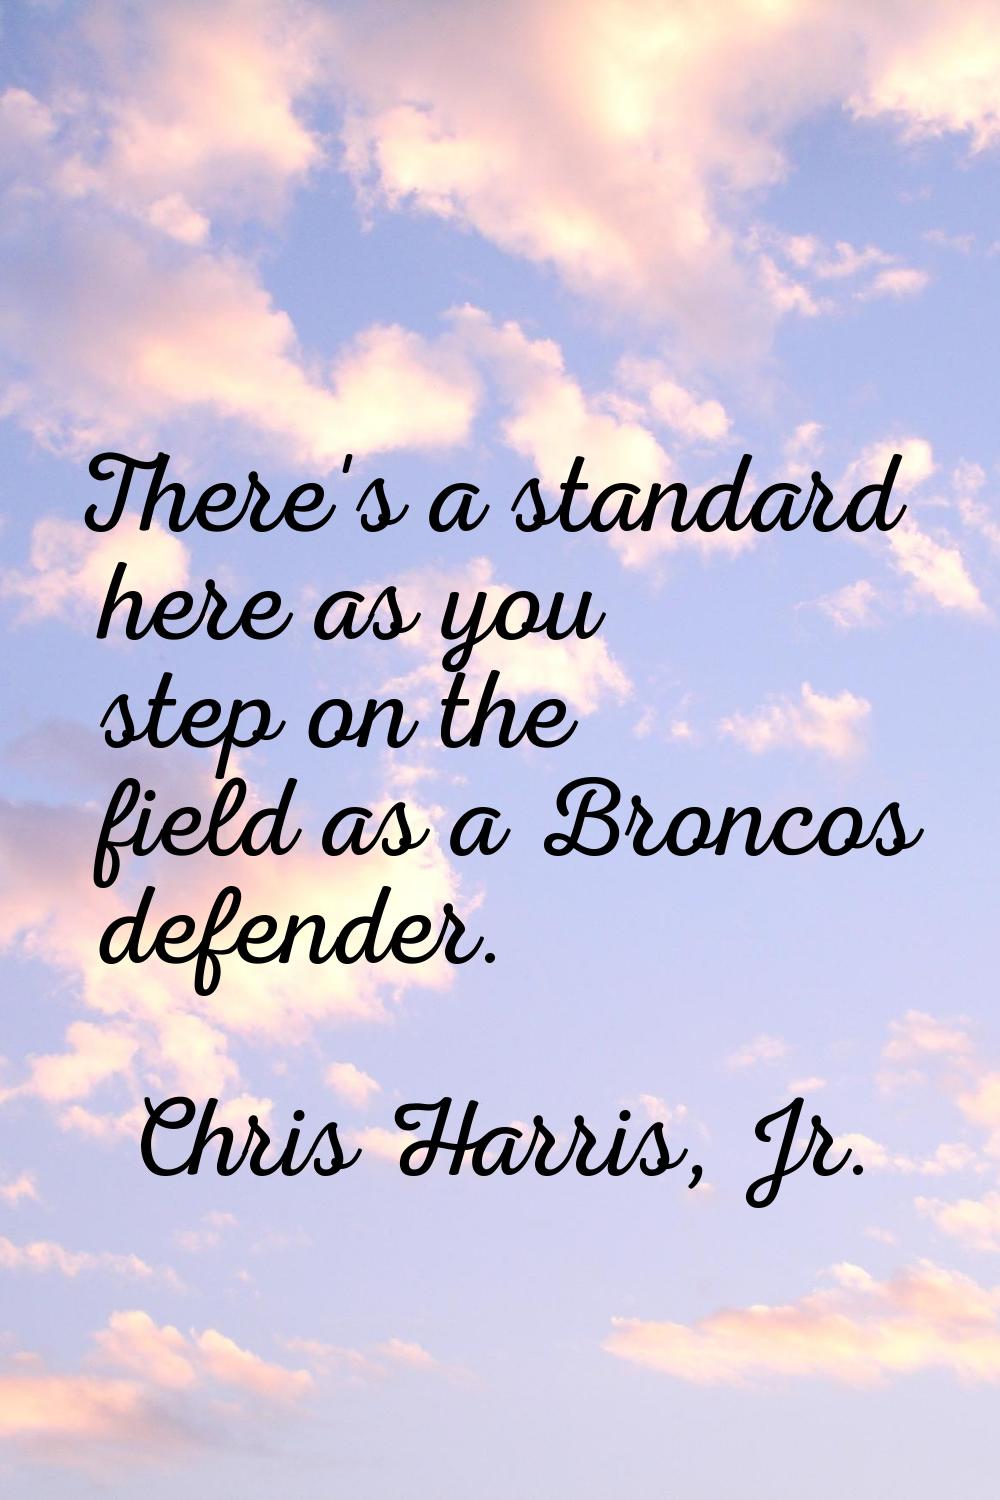 There's a standard here as you step on the field as a Broncos defender.